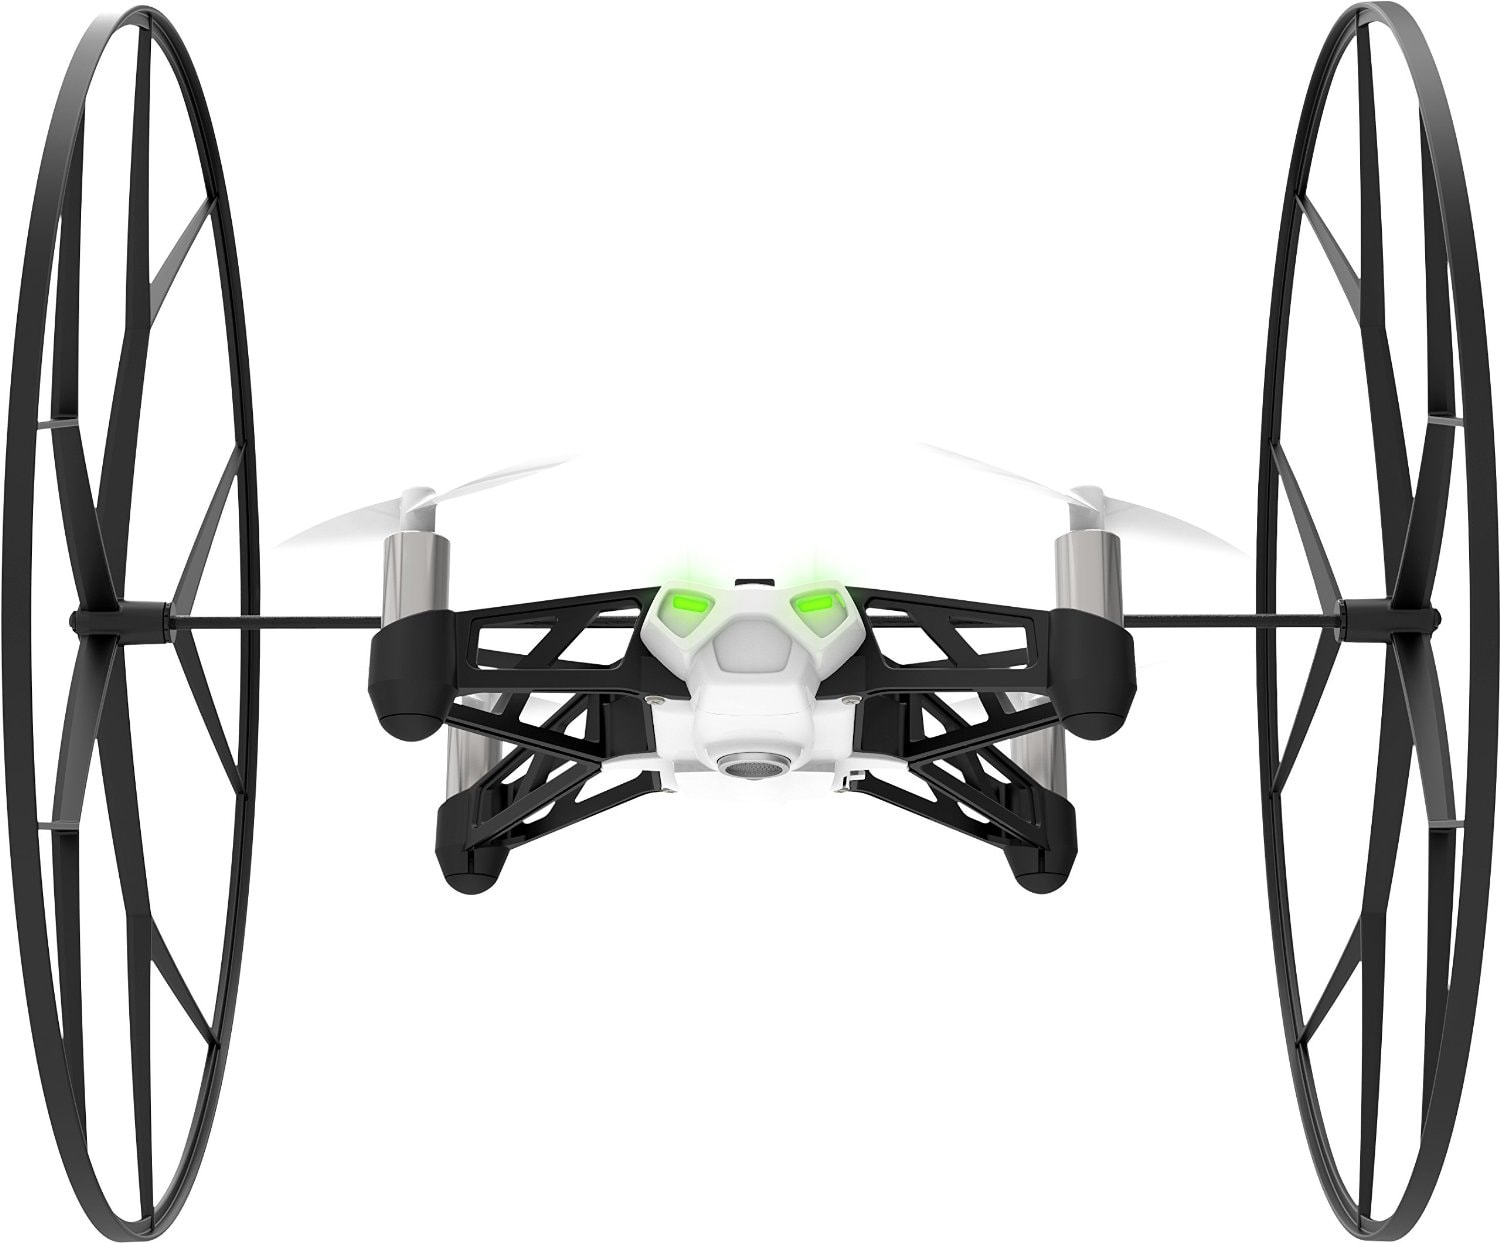 Drone PARROT Rolling Spider blanc Pas Cher 